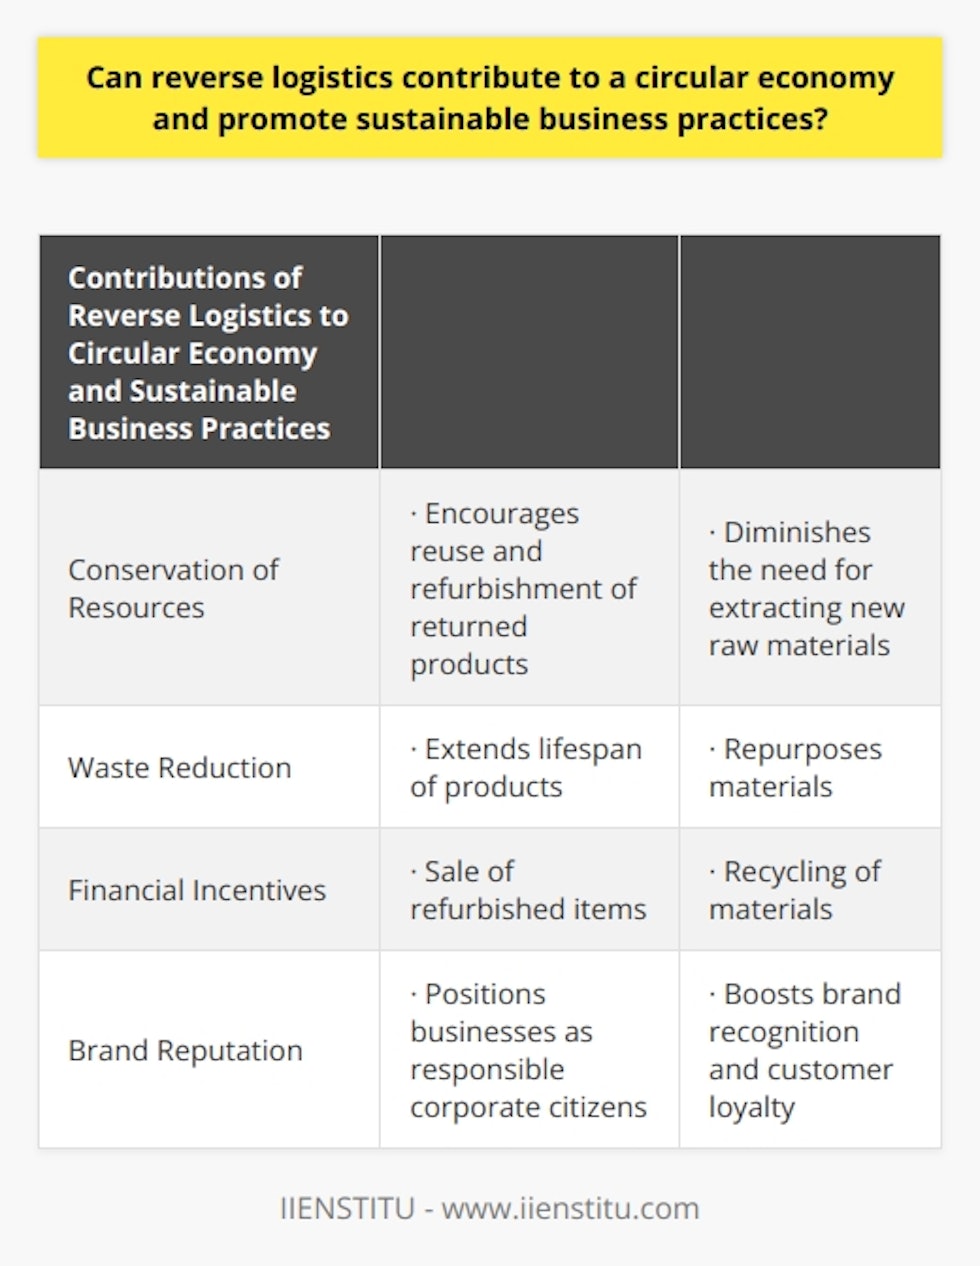 Reverse logistics is undeniably a driving force in the establishment of a circular economy and the promotion of sustainable business practices. By enabling the return and recycling of products and materials, this strategy fosters resource efficiency and reduces waste. Through the adoption of reverse logistics, resource depletion can be minimized, waste generation can be reduced, and businesses can reap financial incentives while enhancing their brand reputation.One of the key contributions of reverse logistics to the circular economy is the conservation of resources. By encouraging the reuse and refurbishment of returned products, a company can significantly diminish the need for extracting new raw materials. This not only lessens the environmental impact associated with resource extraction but also leads to a decrease in production costs. Consequently, businesses can conserve valuable resources, reduce their carbon footprint, and mitigate negative environmental consequences.Furthermore, reverse logistics plays a pivotal role in waste reduction. By extending the lifespan of products and repurposing materials, companies can substantially decrease the volume of waste destined for landfills or incineration. This proactive approach contributes to improved environmental performance and has the potential to save businesses money in terms of waste disposal costs. Ultimately, reverse logistics aids in the shift towards a sustainable business model that values waste minimization.The incorporation of reverse logistics into a circular economy can also yield significant financial incentives. The sale of refurbished items, recycling of materials, and collaboration with other partners in a circular supply chain can create new revenue streams and cost-saving opportunities. These financial benefits can lead to increased profitability and make sustainable business practices more appealing to shareholders. By embracing reverse logistics, companies can not only contribute to the planet's well-being but also enhance their own economic prosperity.Another advantage of adopting reverse logistics is the positive impact it can have on a company's brand reputation. By prioritizing sustainability and actively participating in a circular economy, businesses can position themselves as responsible corporate citizens who genuinely care about the environment and their impact on society. This image can garner customer loyalty, boost brand recognition, and provide competitive advantage in the market. Embracing reverse logistics can thus result in the strengthening of a company's brand reputation and its overall success.In conclusion, the integration of reverse logistics into business operations can significantly contribute to the establishment of a circular economy and the promotion of sustainable practices. Through the extension of product lifecycles and the reduction of waste generation, reverse logistics conserves resources, offers financial incentives, and enhances brand reputation. By adopting reverse logistics, businesses can maximize the potential advantages while striving for sustainability.